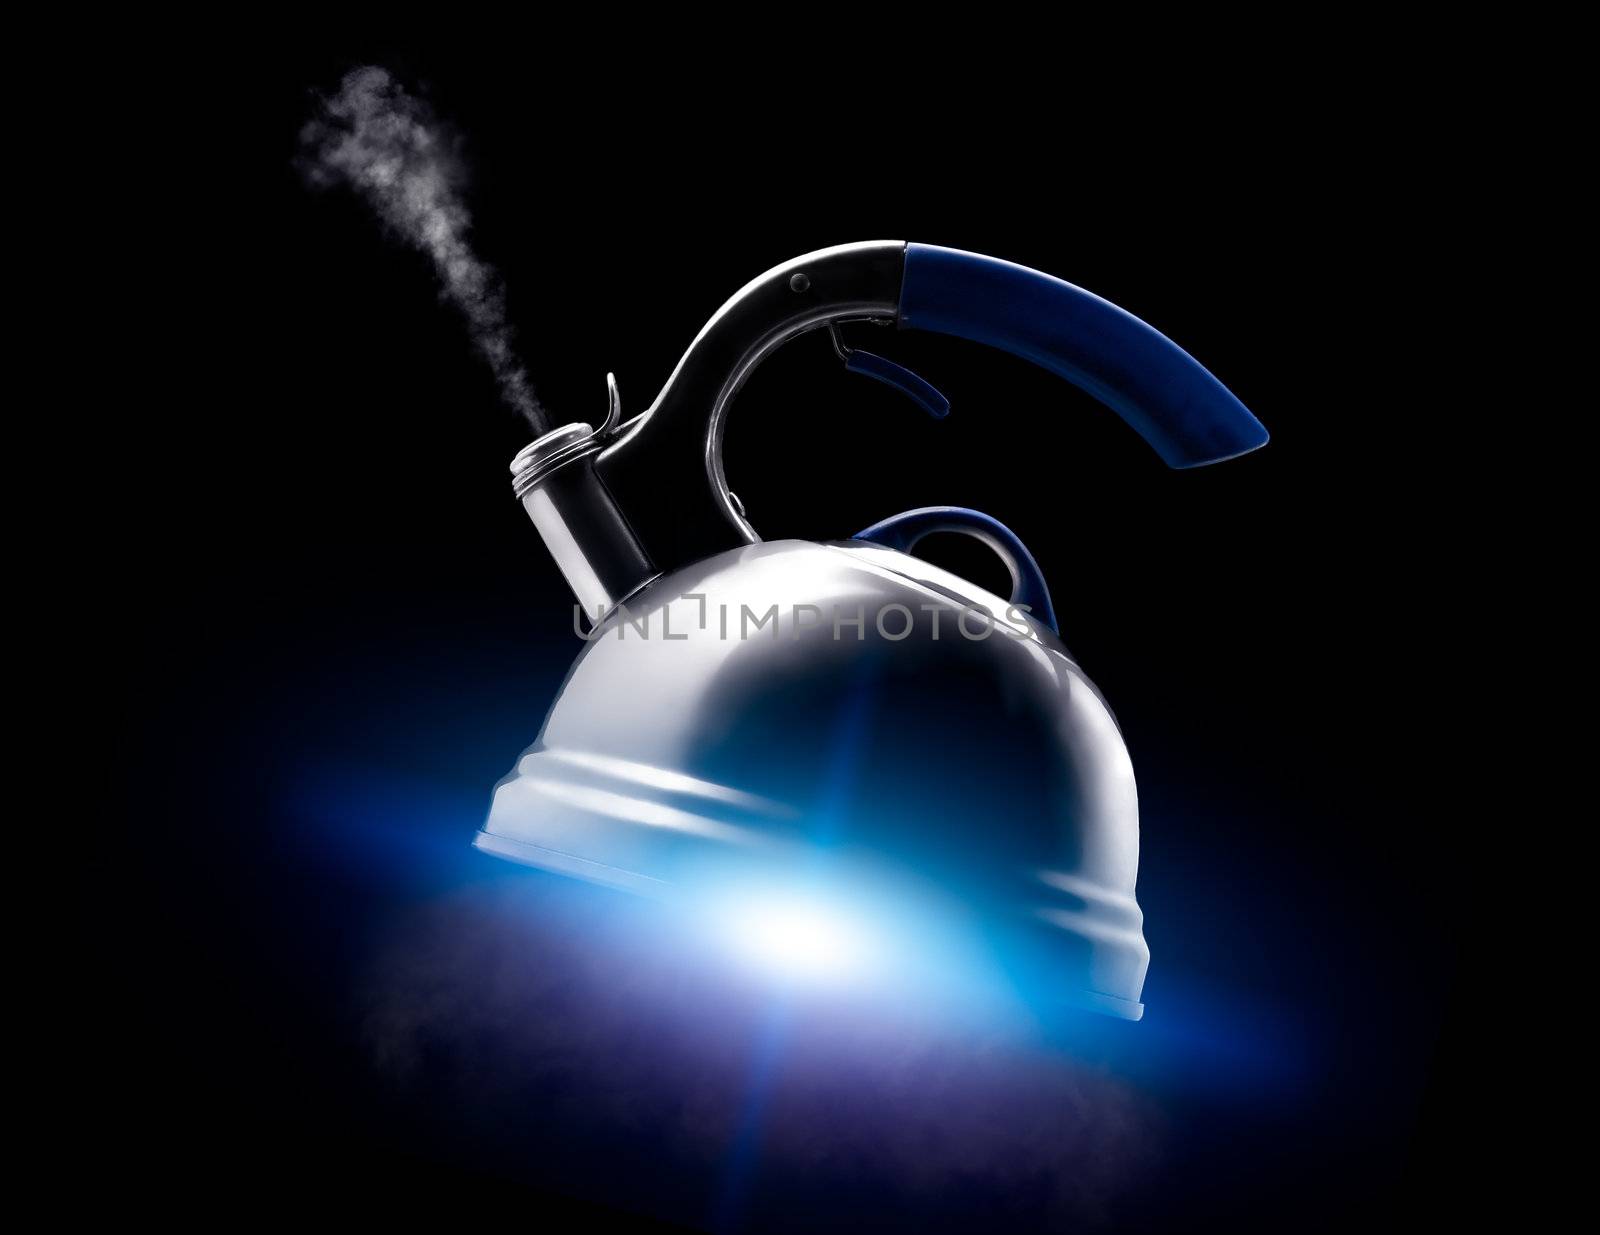 Tea kettle with boiling water on black background. Blue glow like from the spaceship's engine under the kettle.